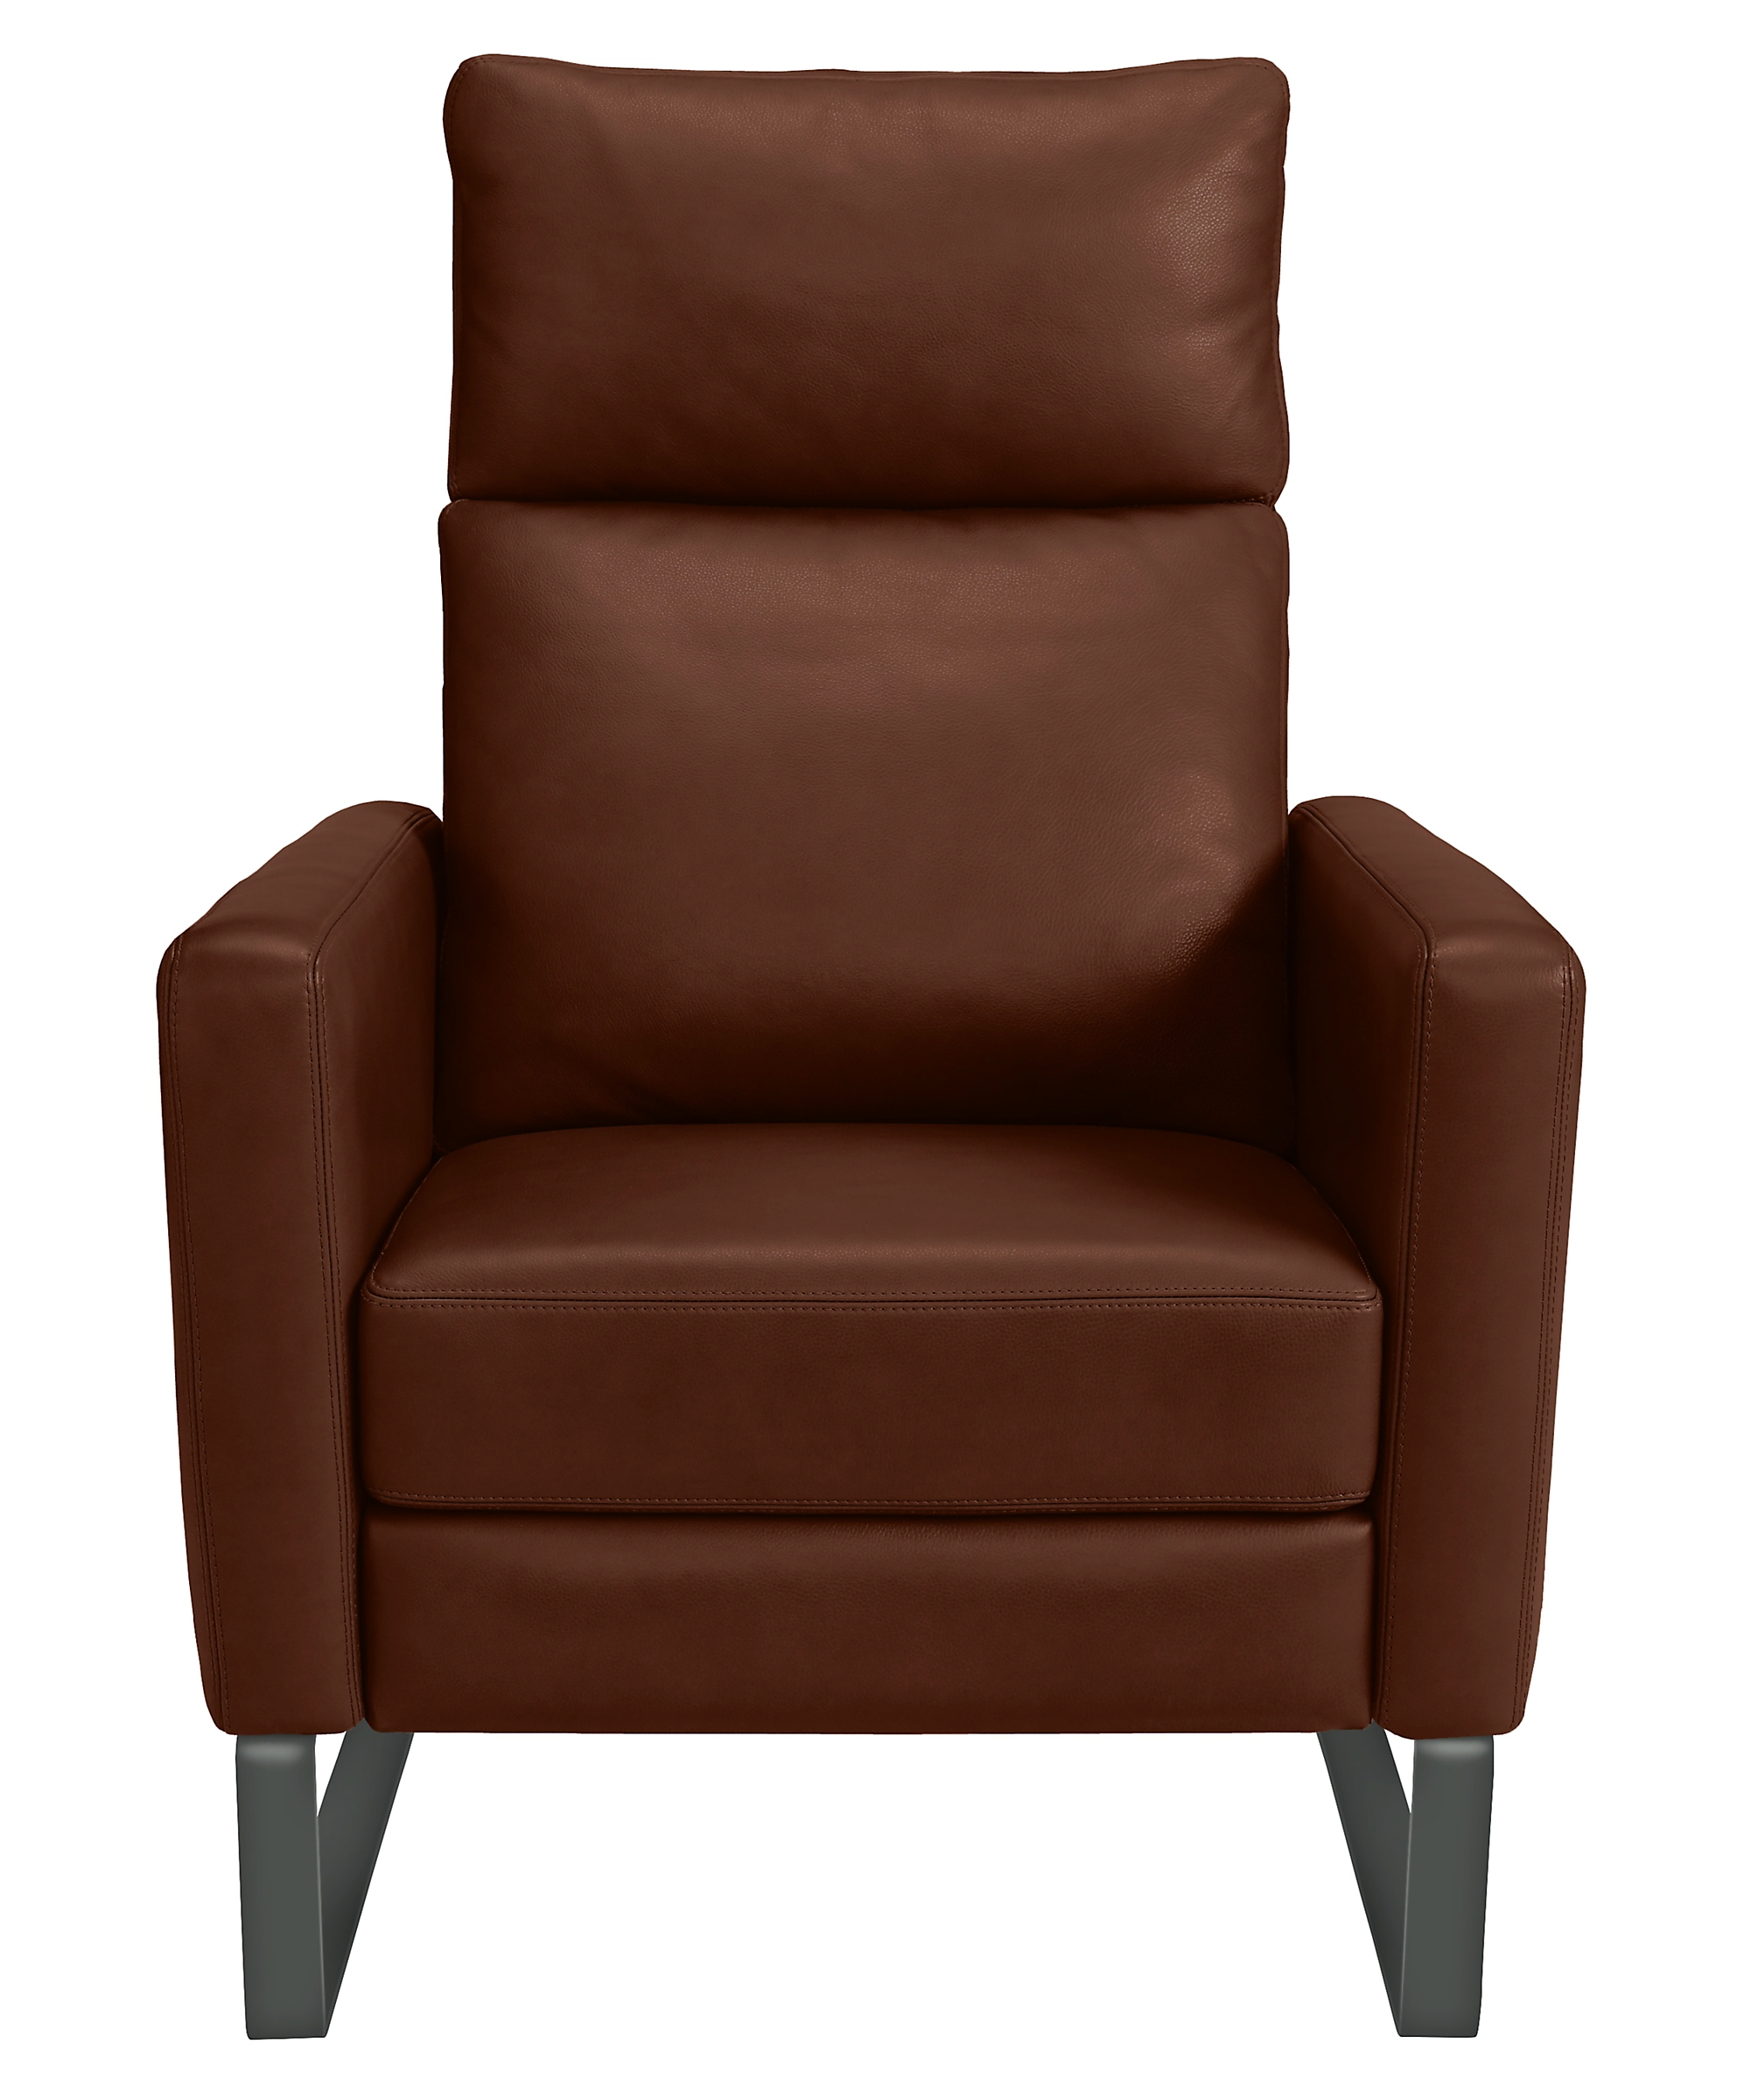 Wynton Leather Recliners with Sled Base